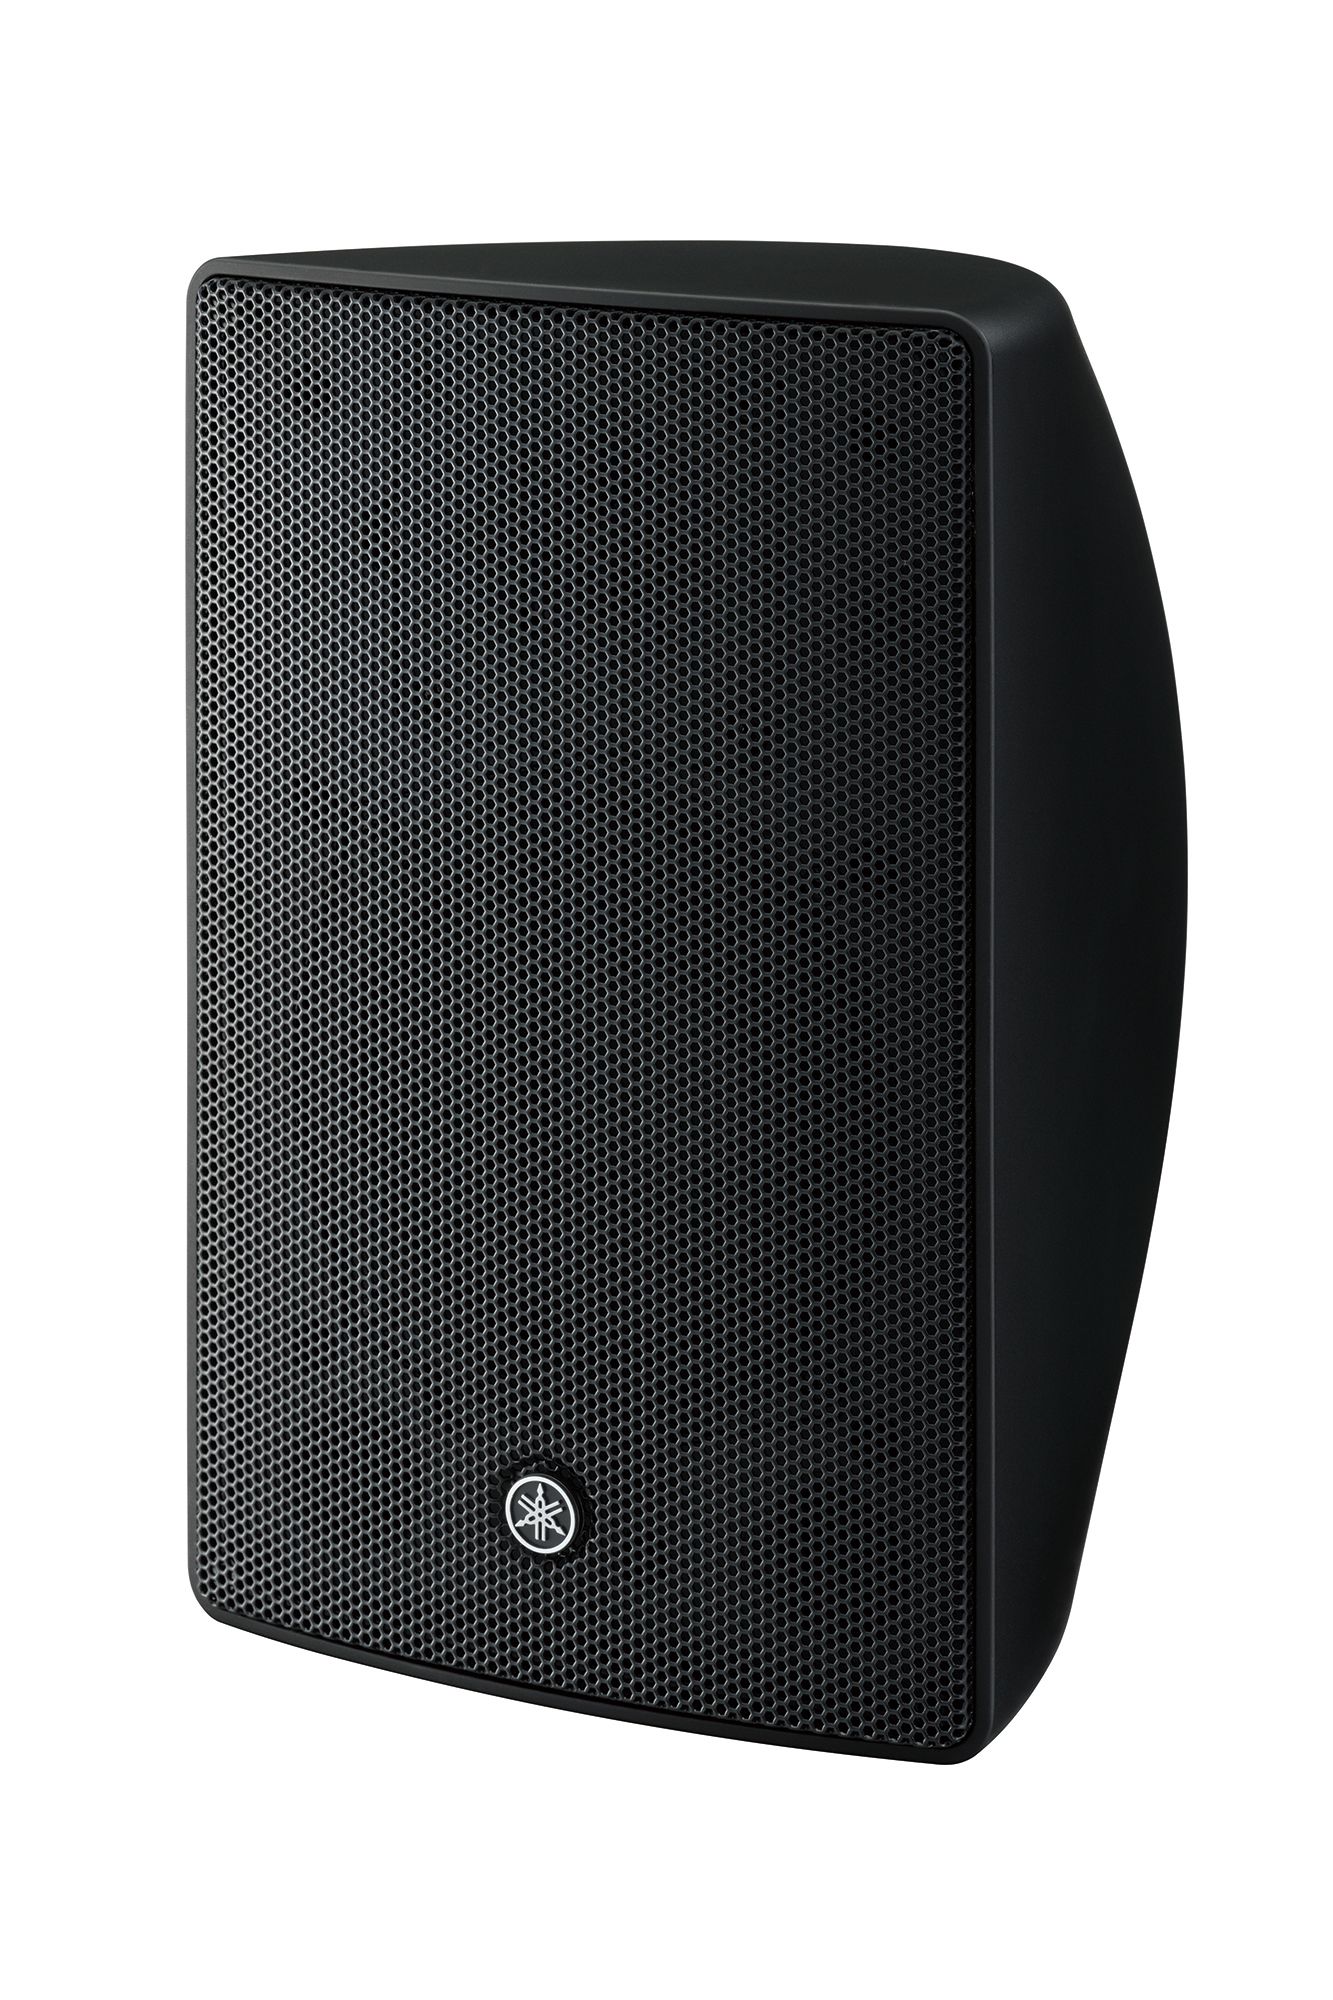 VXS Series - Overview - Speakers - Professional Audio - Products 